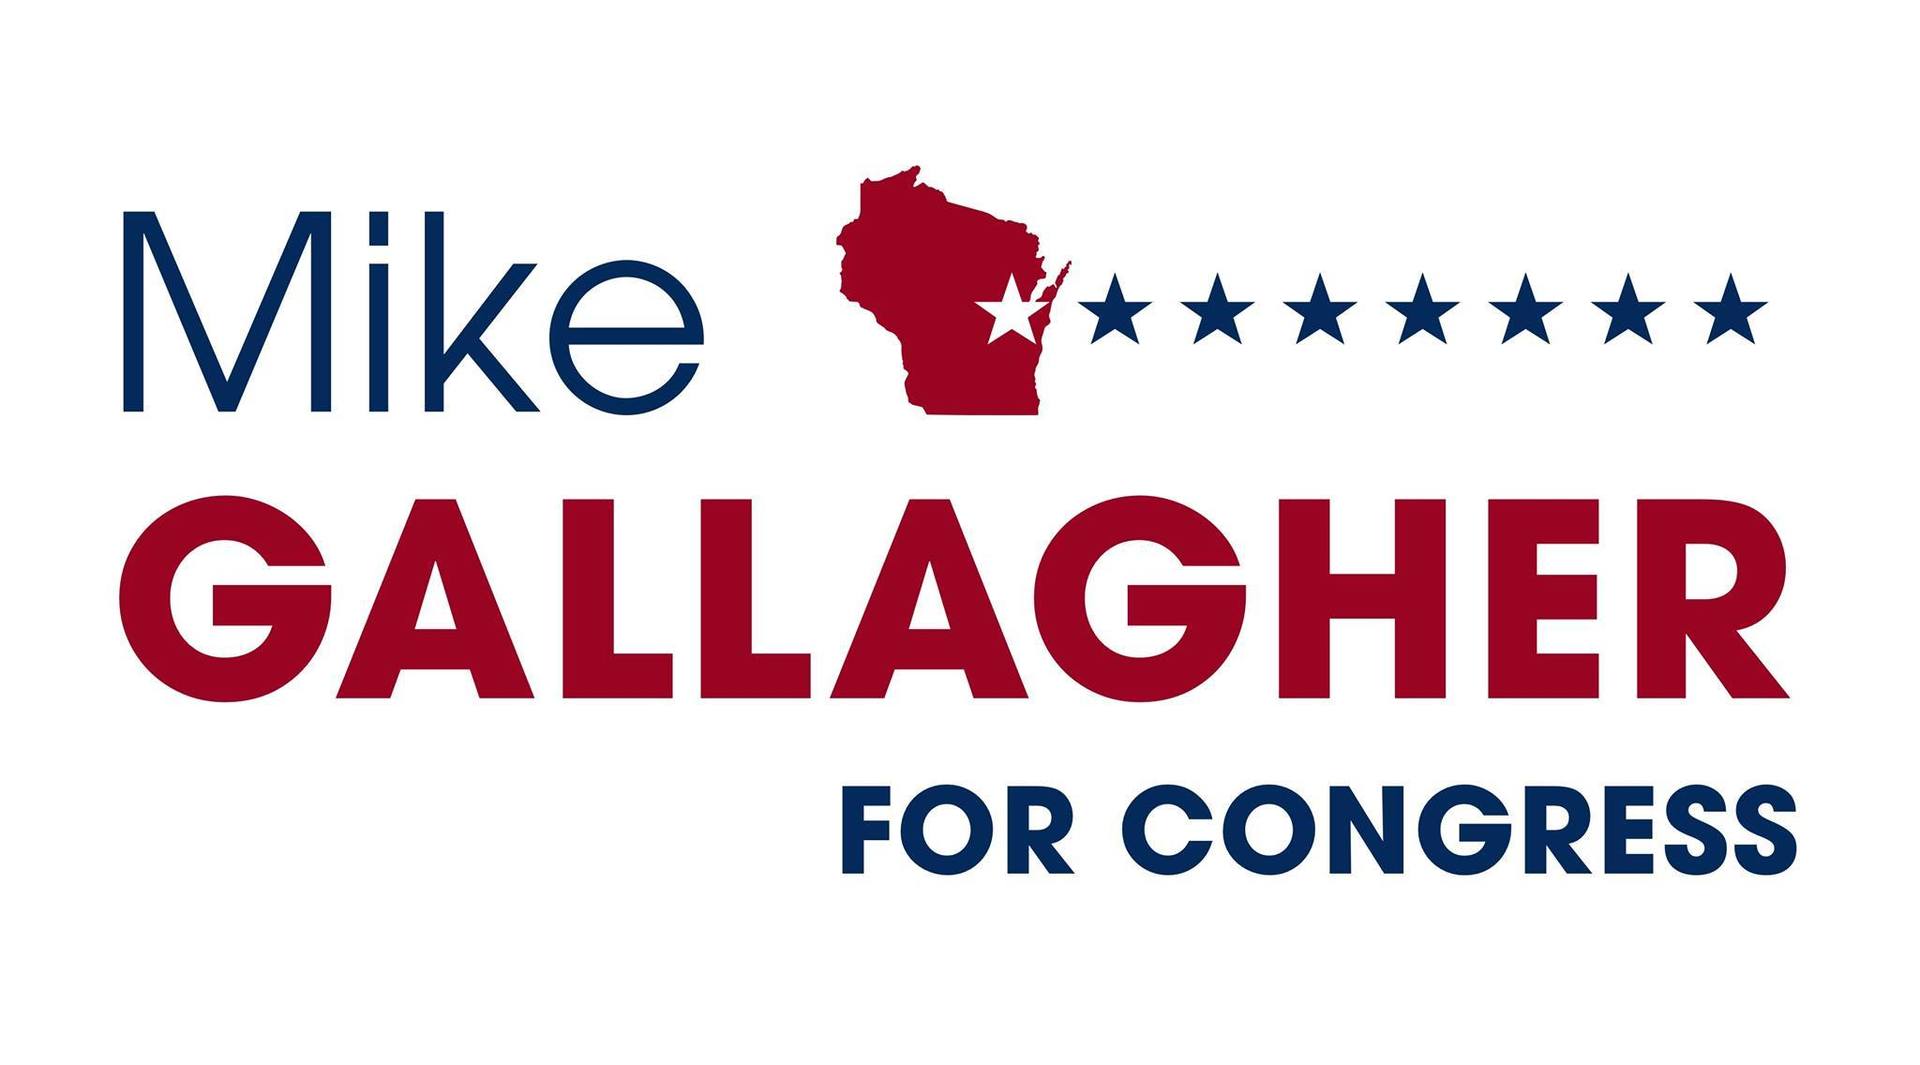 Support Mike Gallagher for Congress